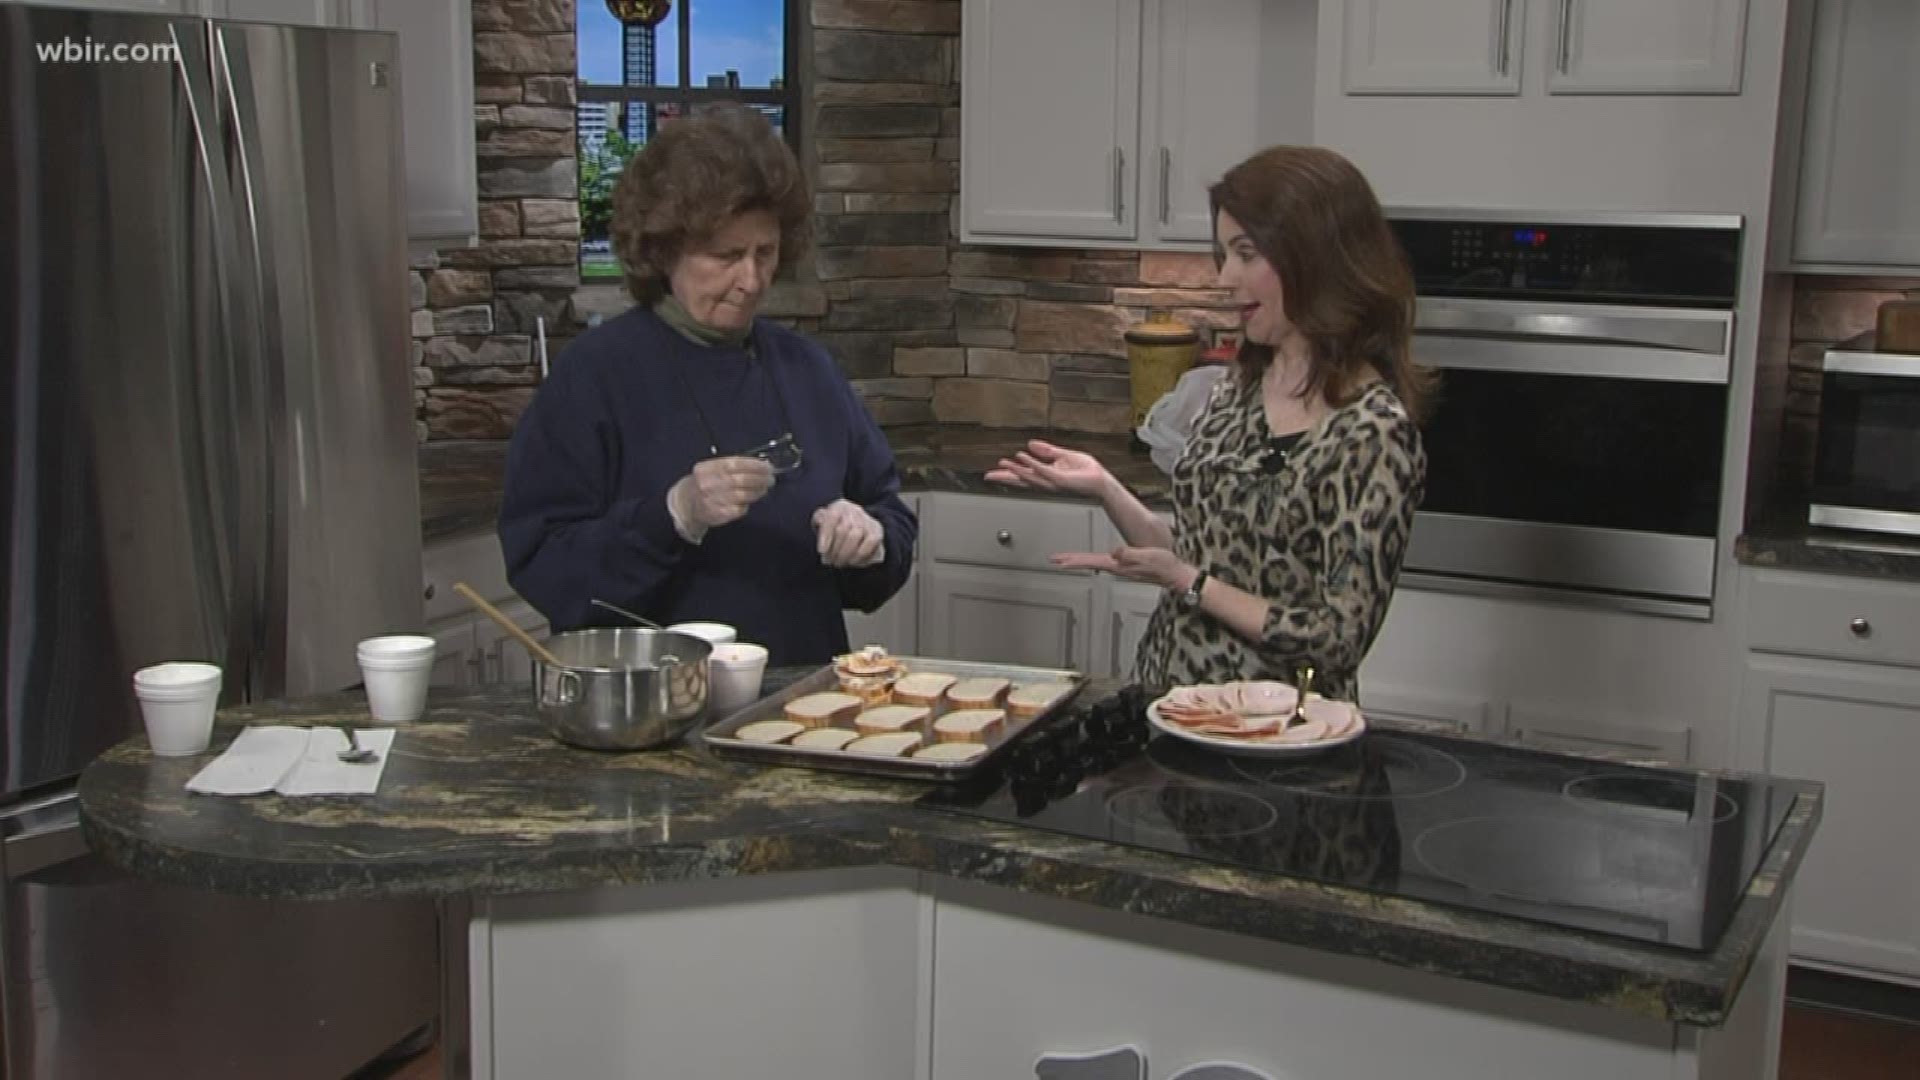 Miss Olivia shares a recipe for a Southwestern Open-faced sandwich. Miss Olivia's Table is located at 1108 W. Broadway in Maryville. Jan 2, 2020-4pm.